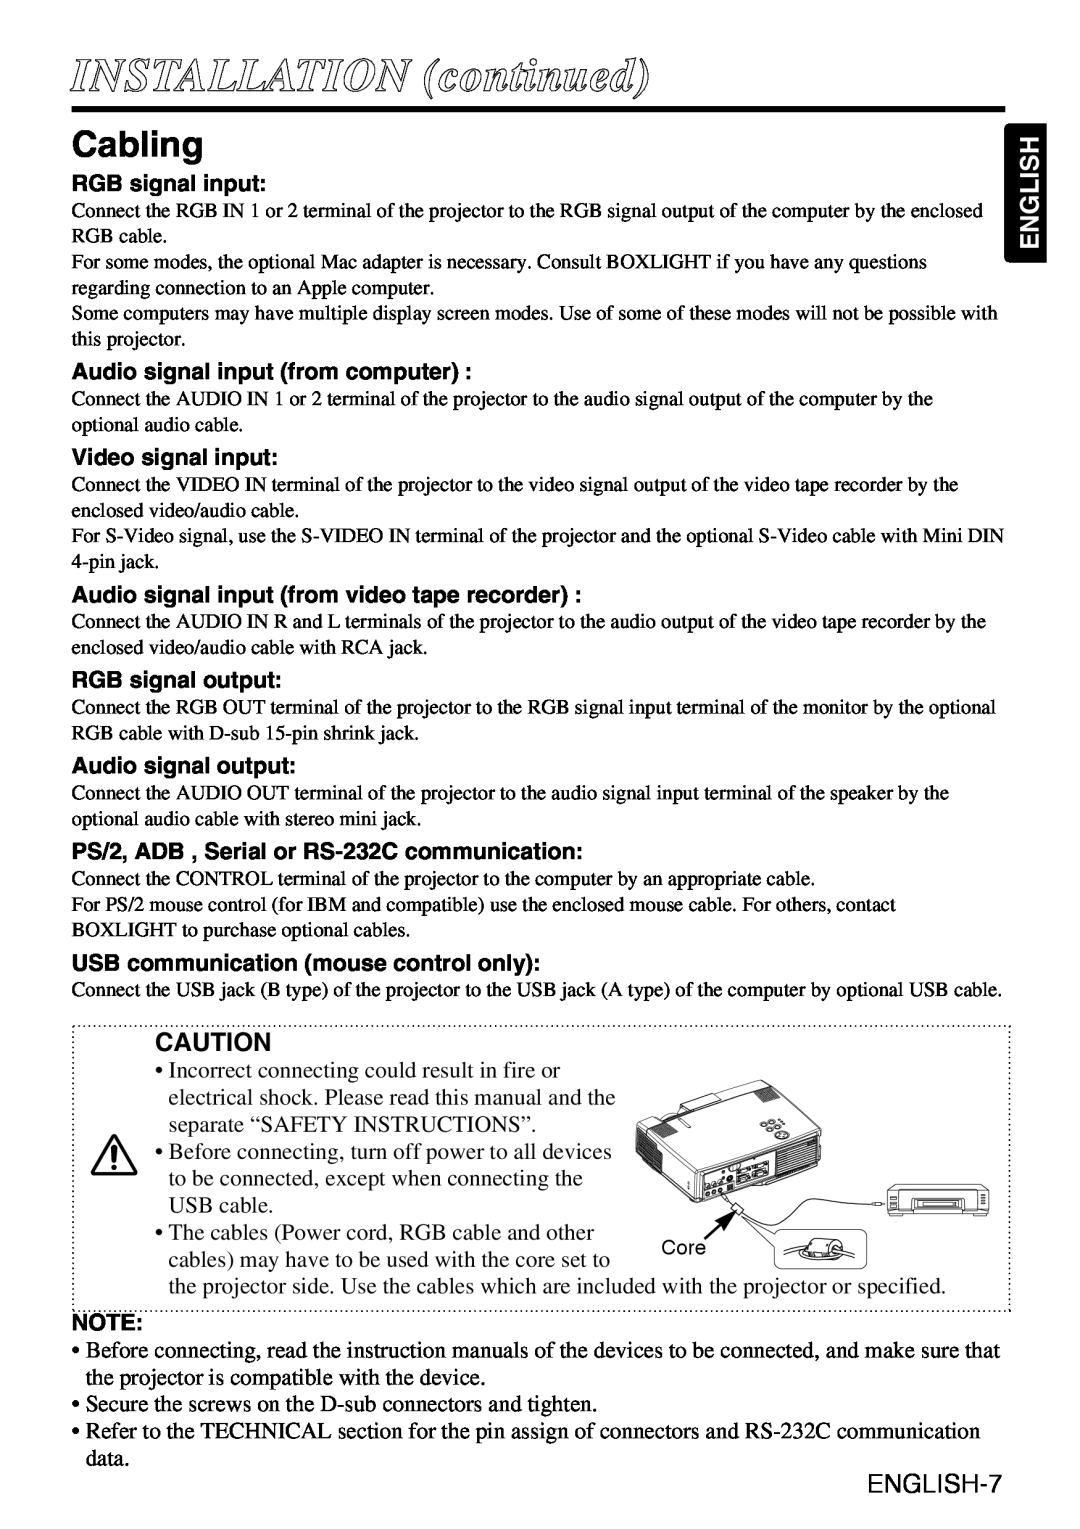 Grundig CP-731i user manual INSTALLATION continued, Cabling, English, RGB signal input, Audio signal input from computer 